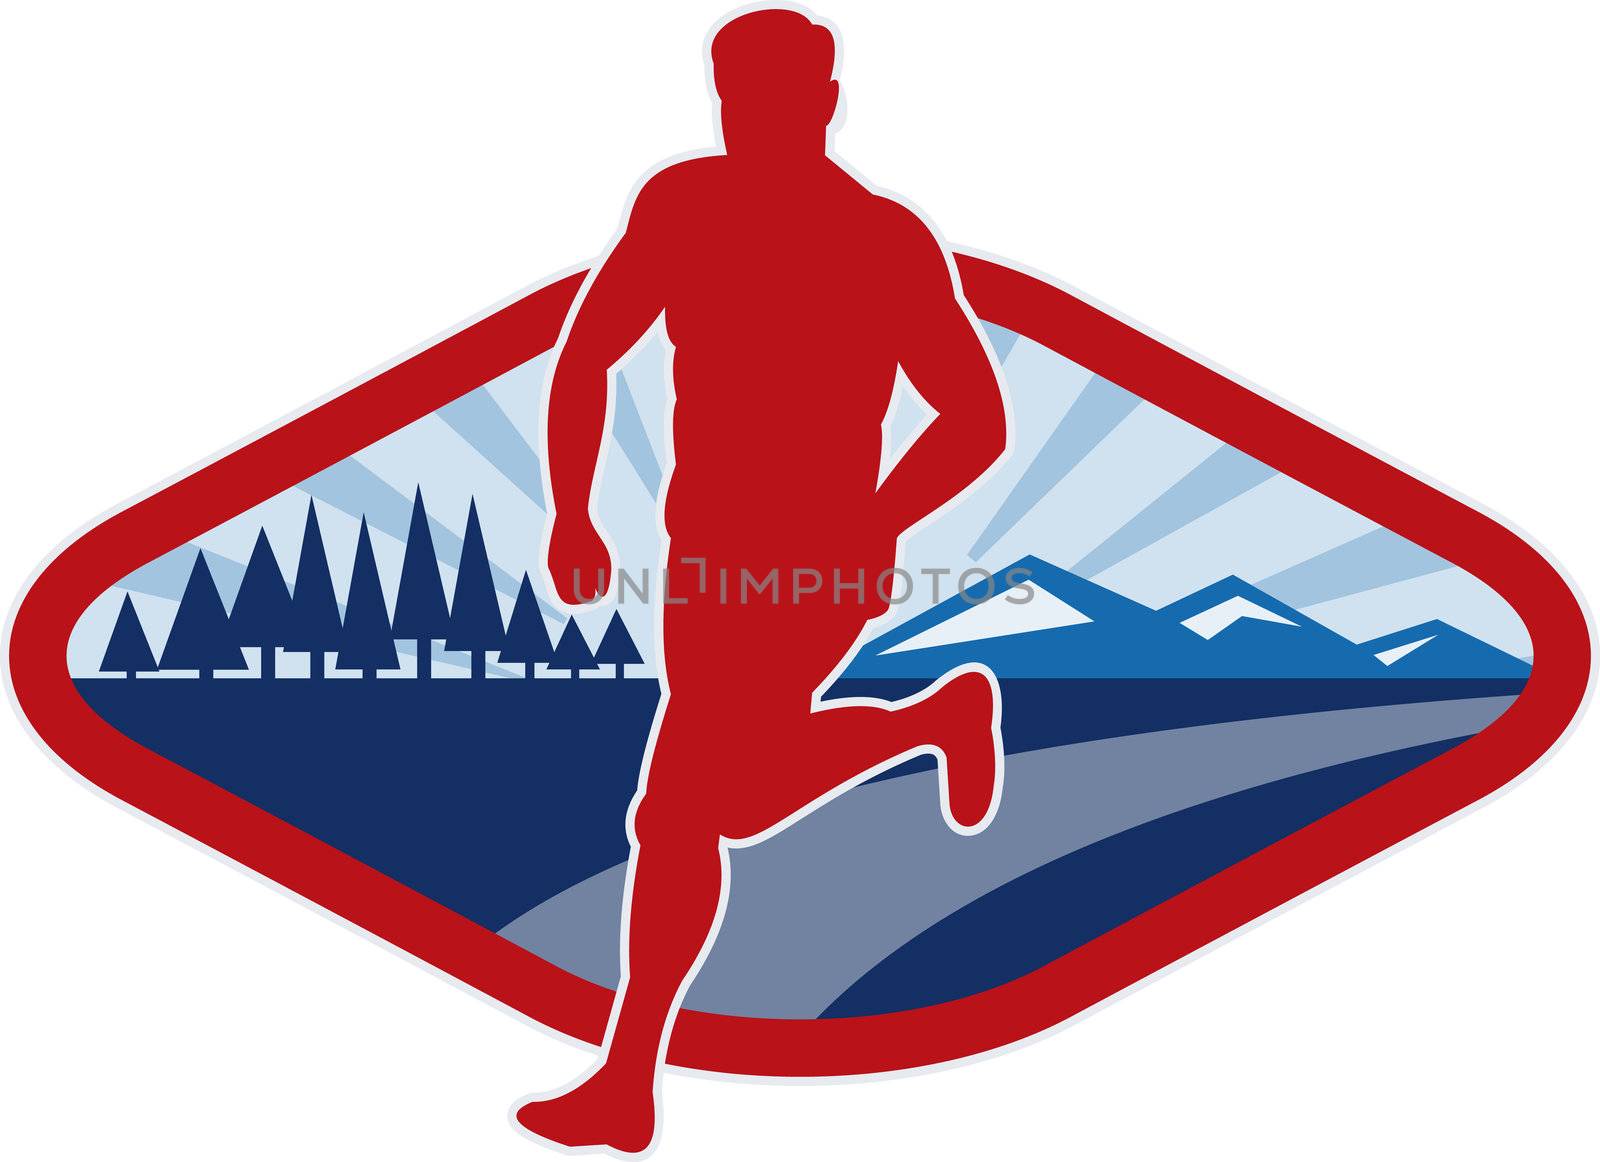 illustration of a Cross country runner with landscape and sunburst